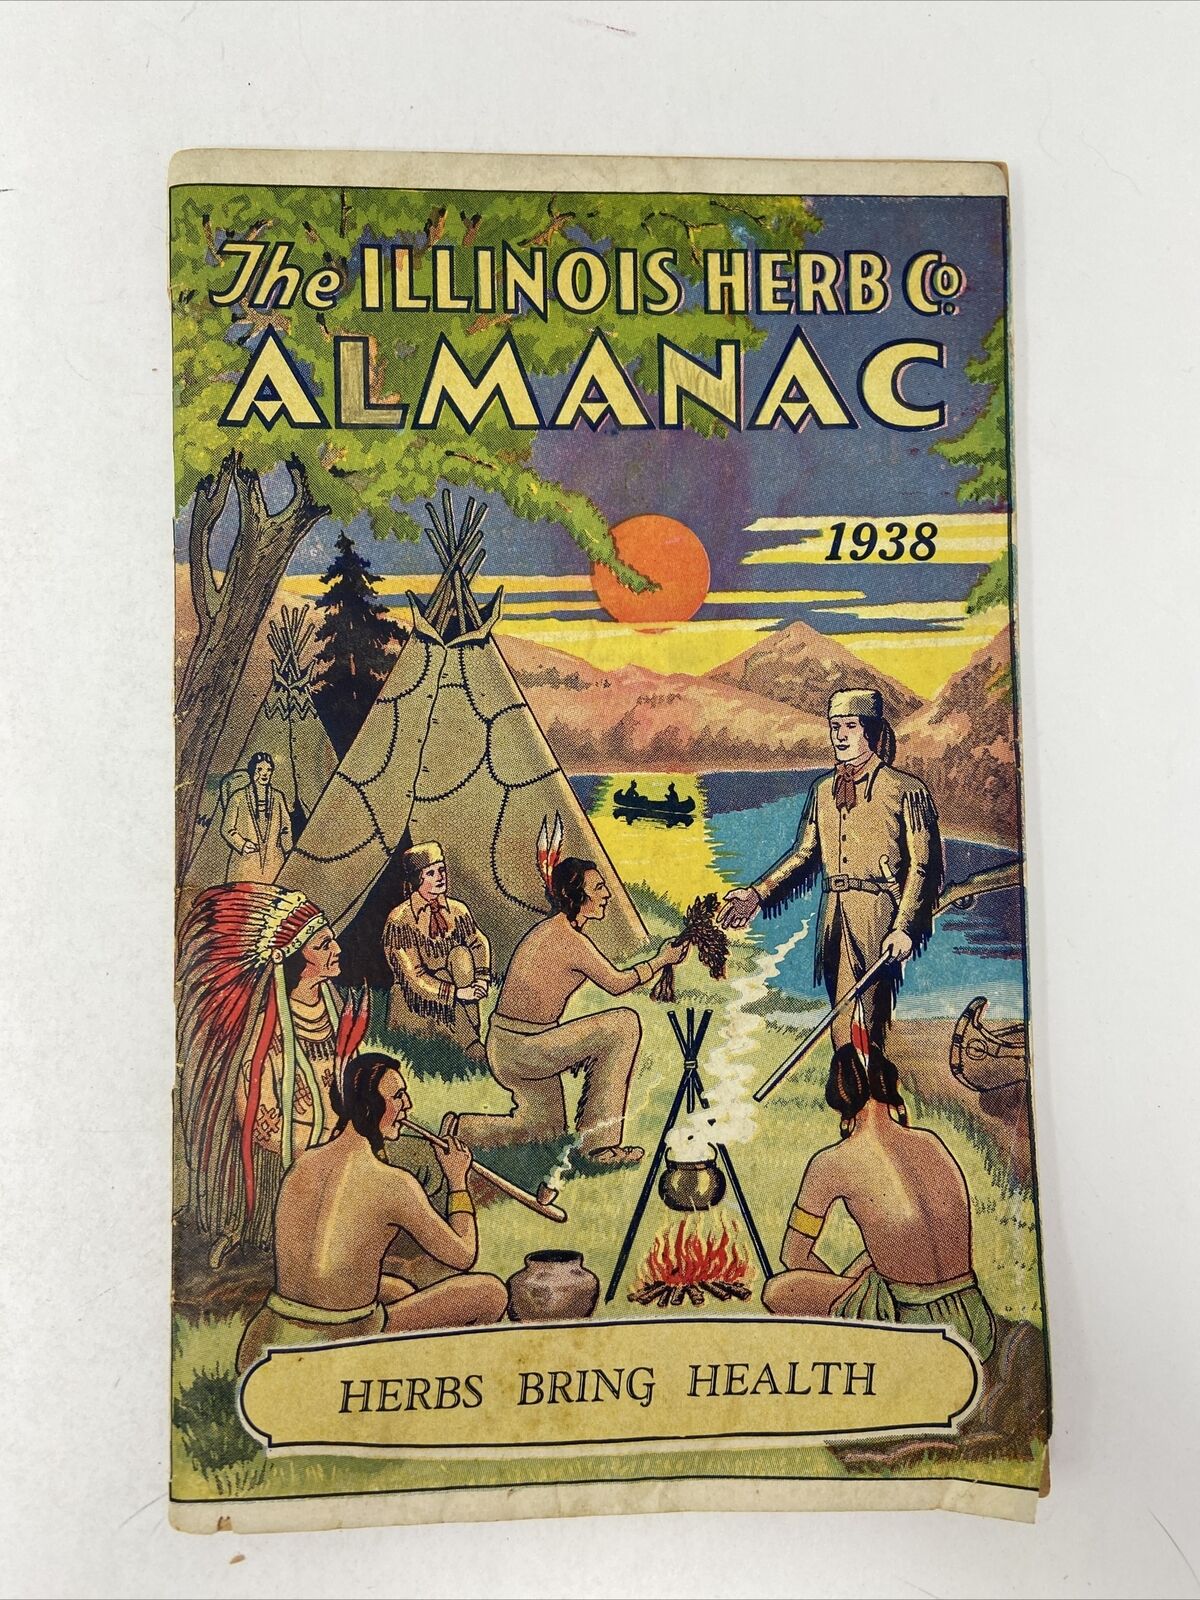 1938 The Illinois Herb Co. Almanac Vintage Print Ads Astrology Native American